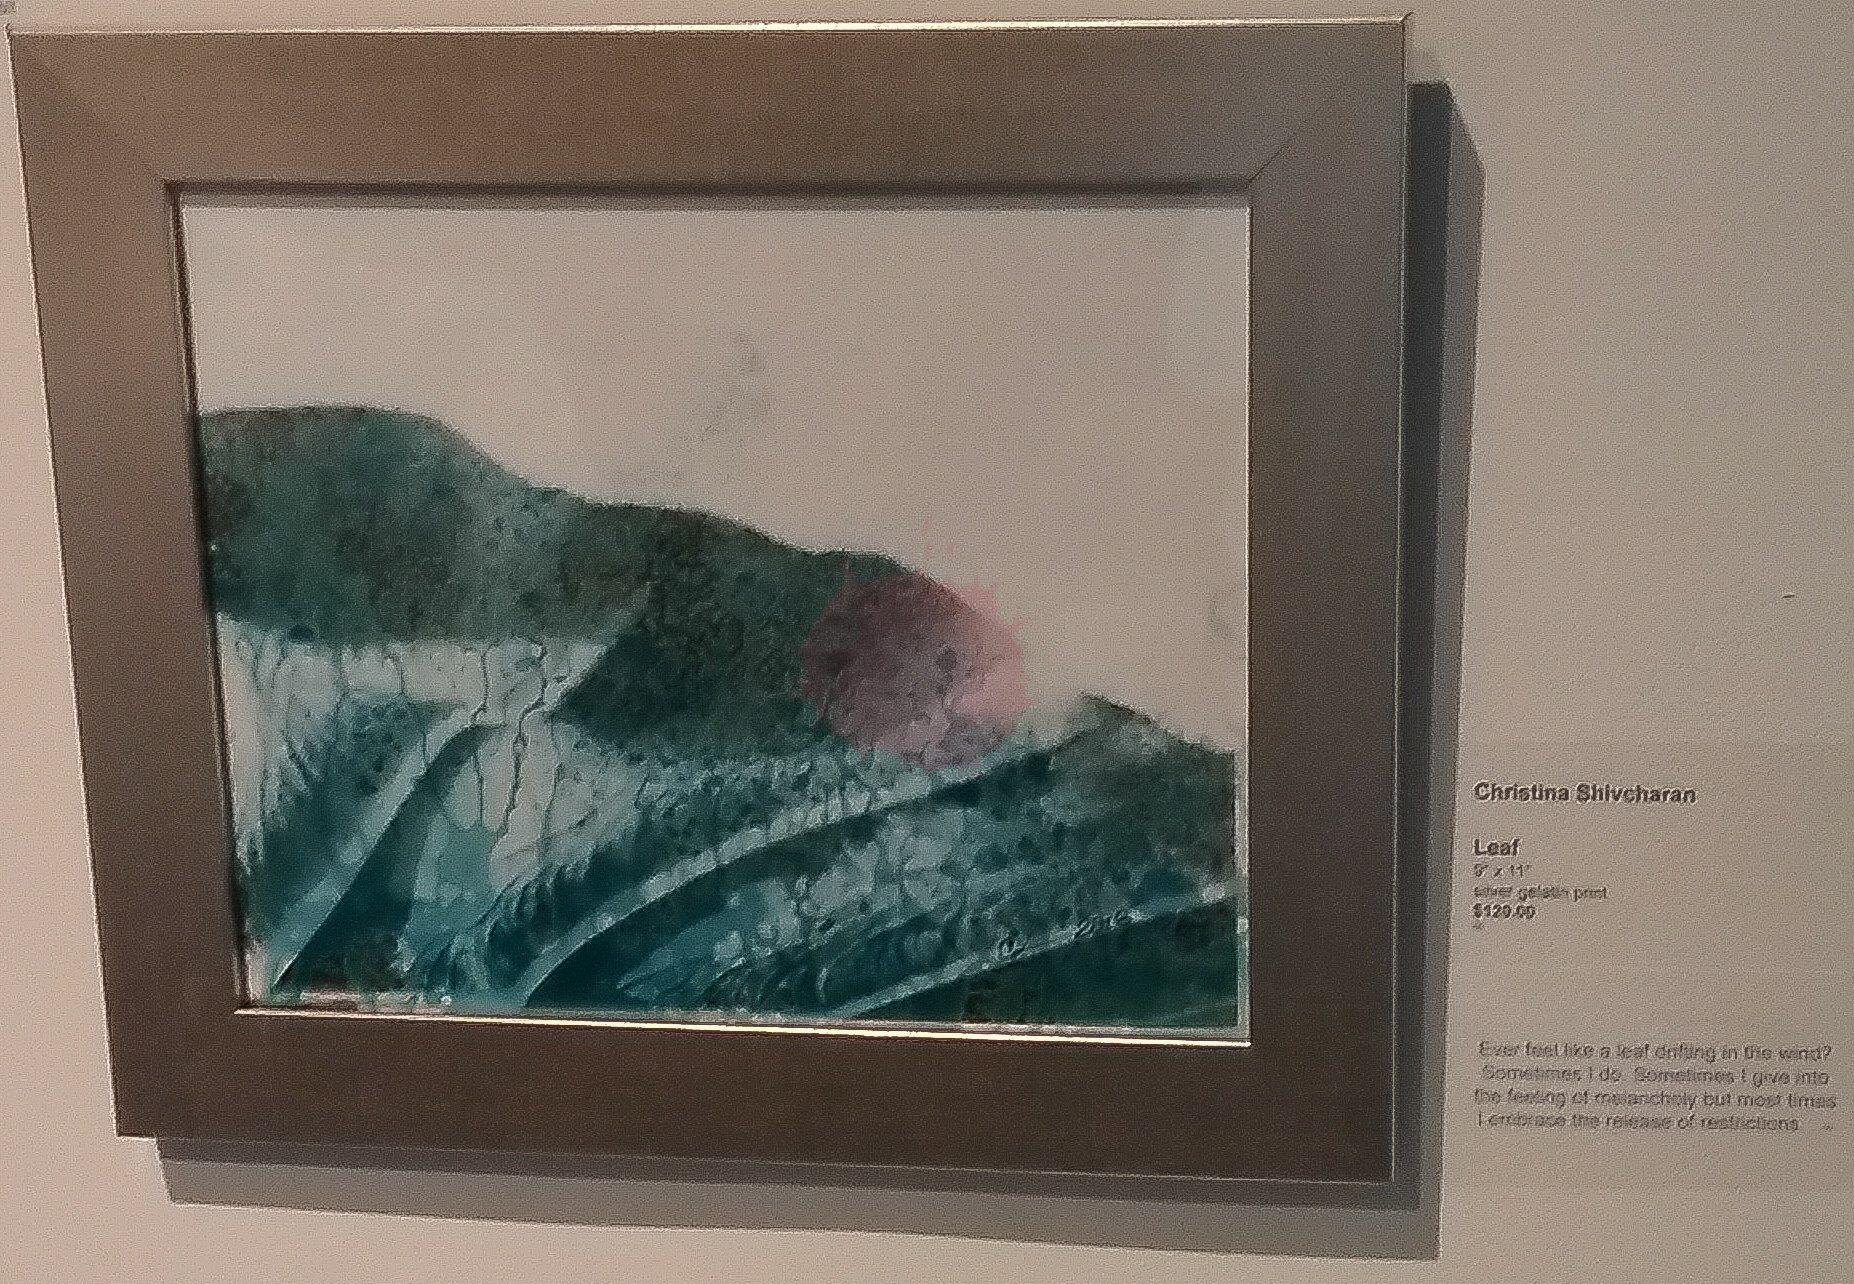 Leaf 2018, toned film-based, silver gelatin photograph on display at Propeller Gallery's Blue Impluse exhibit.  Photographer, Christina Shivcharan